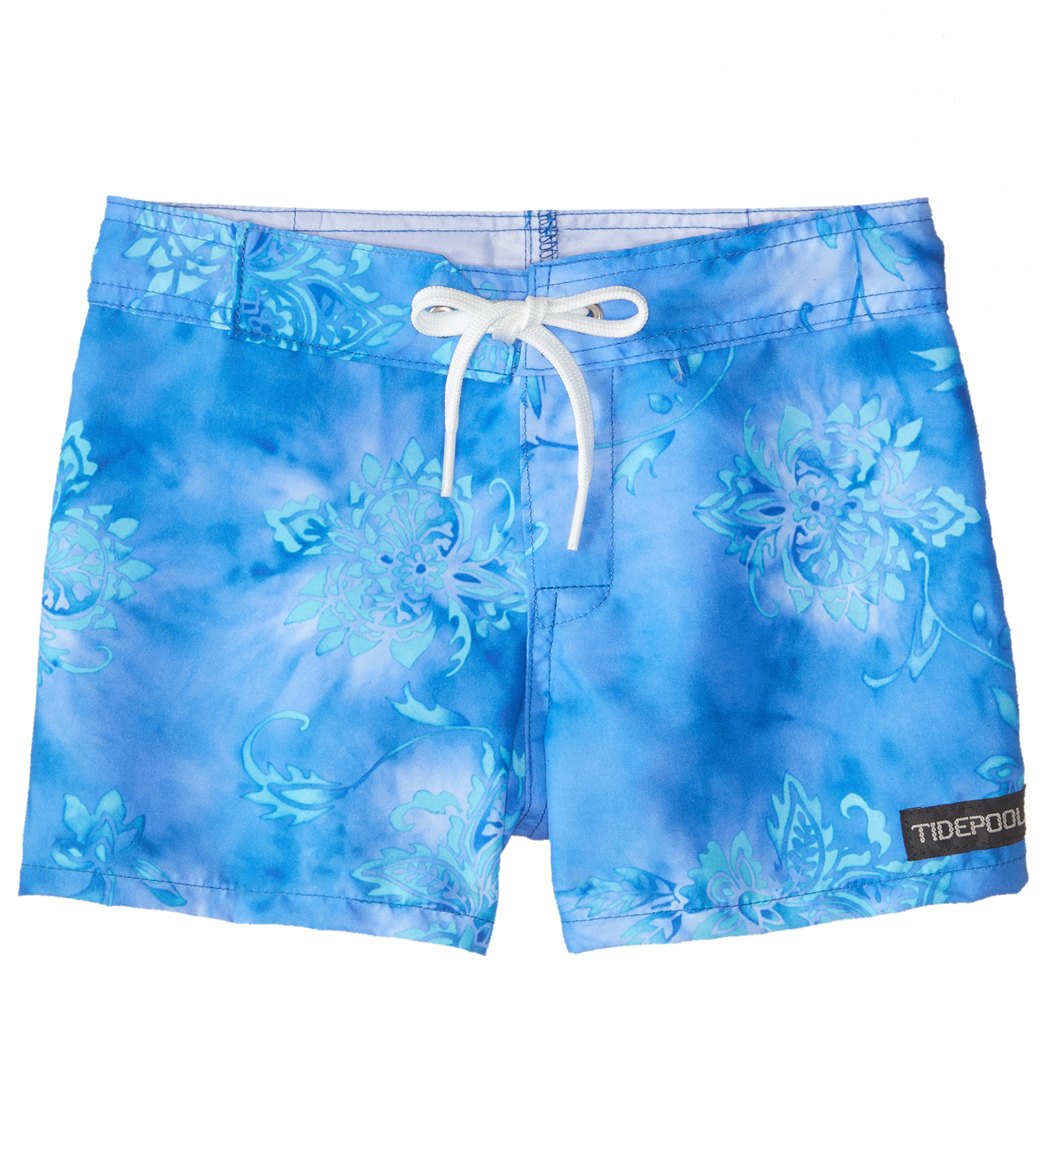 Tidepools Girls' Starbust Boardshorts Toddler/Little/Big Kid - Sky X-Small 2/3 Polyester - Swimoutlet.com